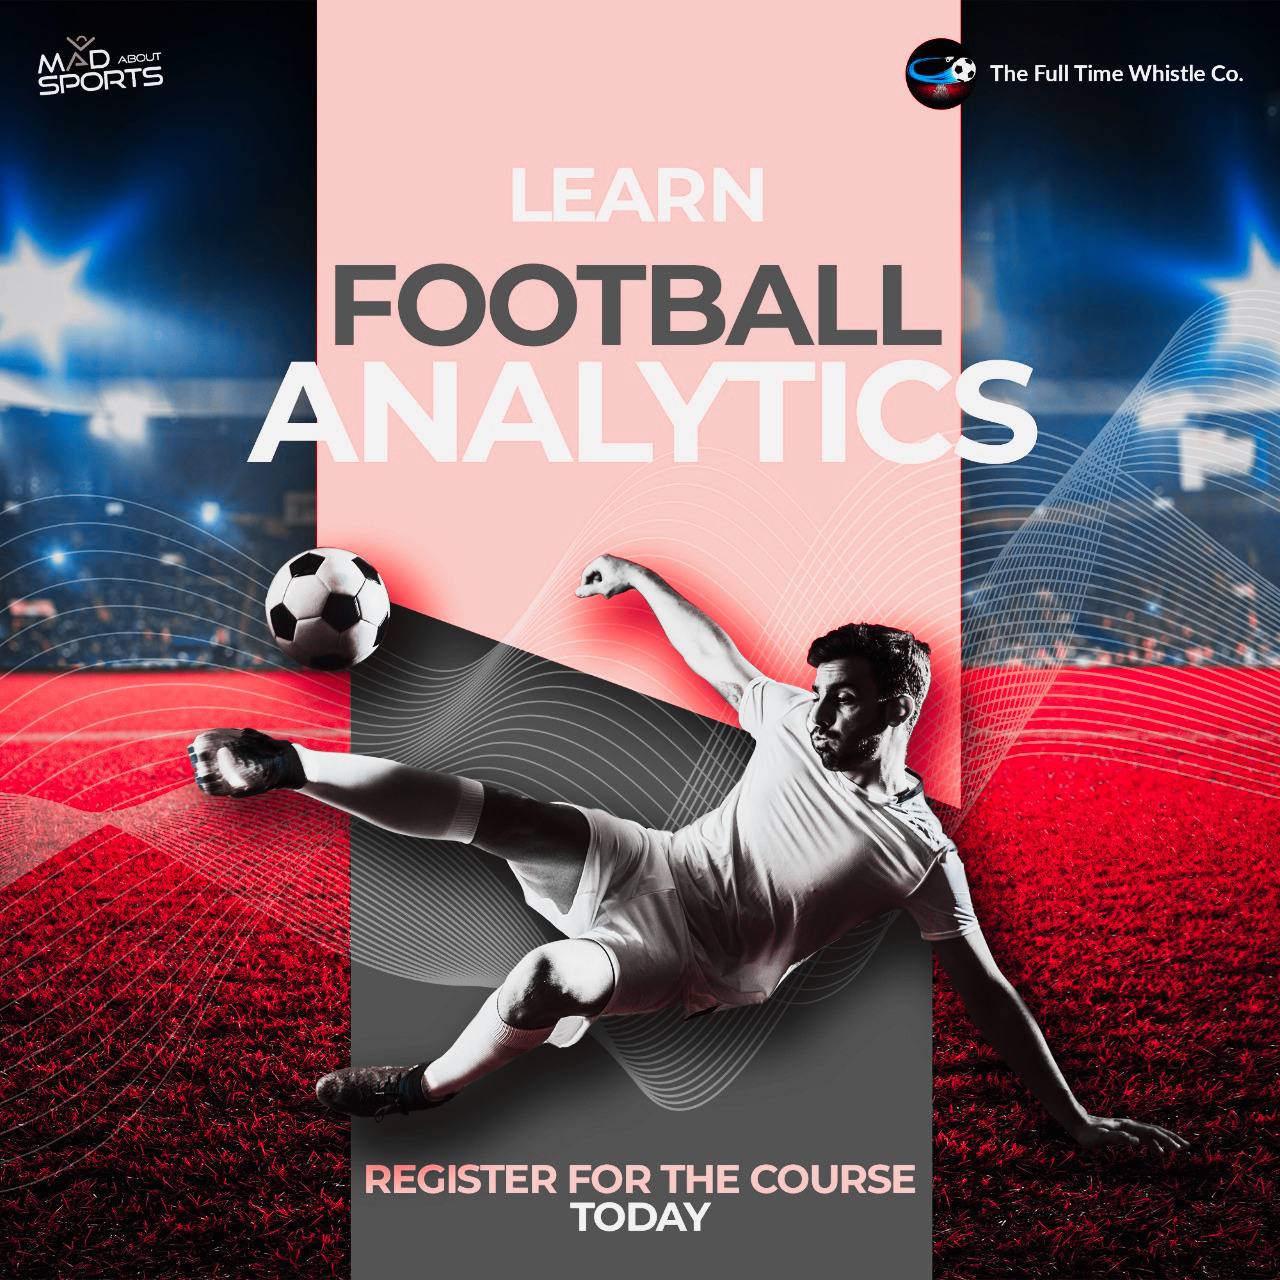 How Pass Maps Created By Football Data Analysts Help Managers At The Top Level? – Learn Football Analytics On Mad About Sports